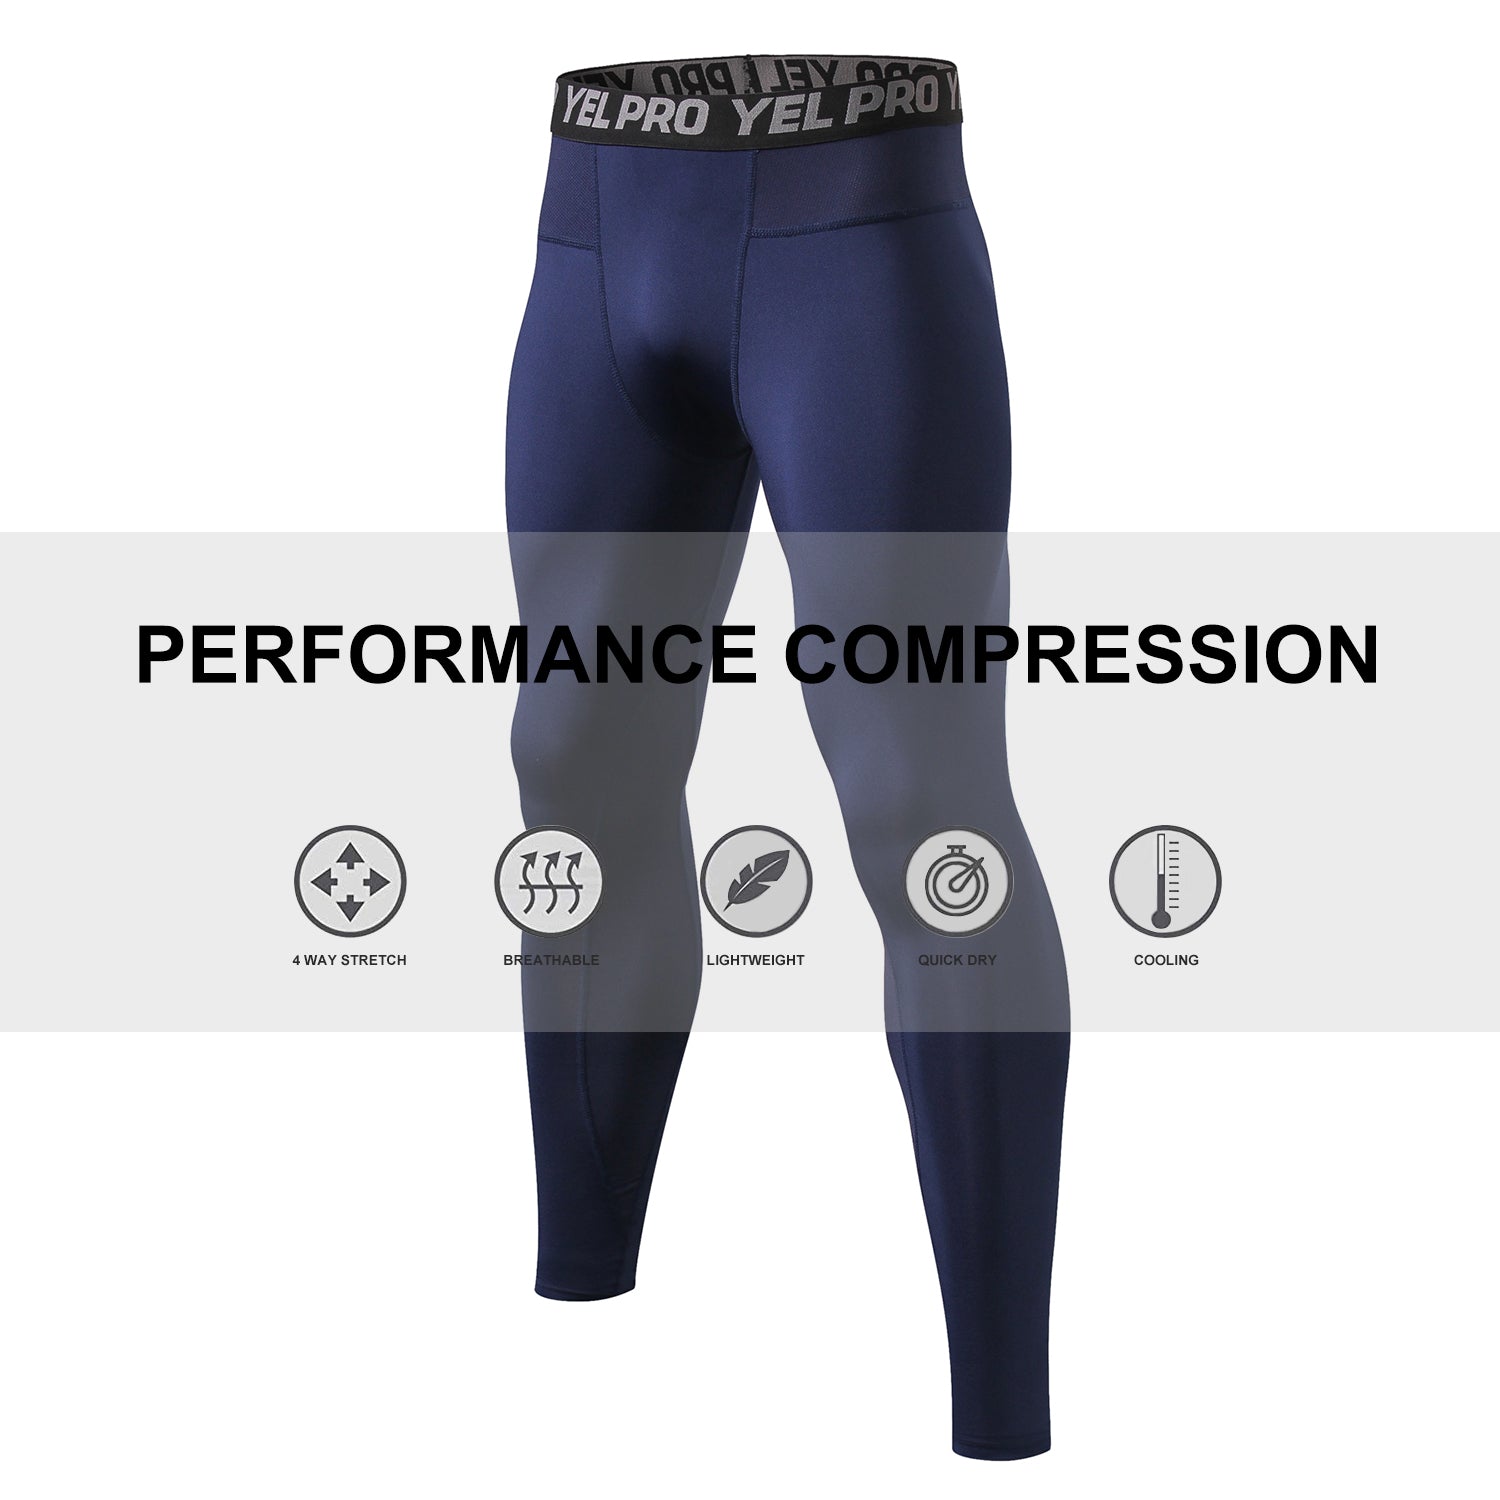 Men Base Layer Trousers Exercise Running Tights Basketball Sport